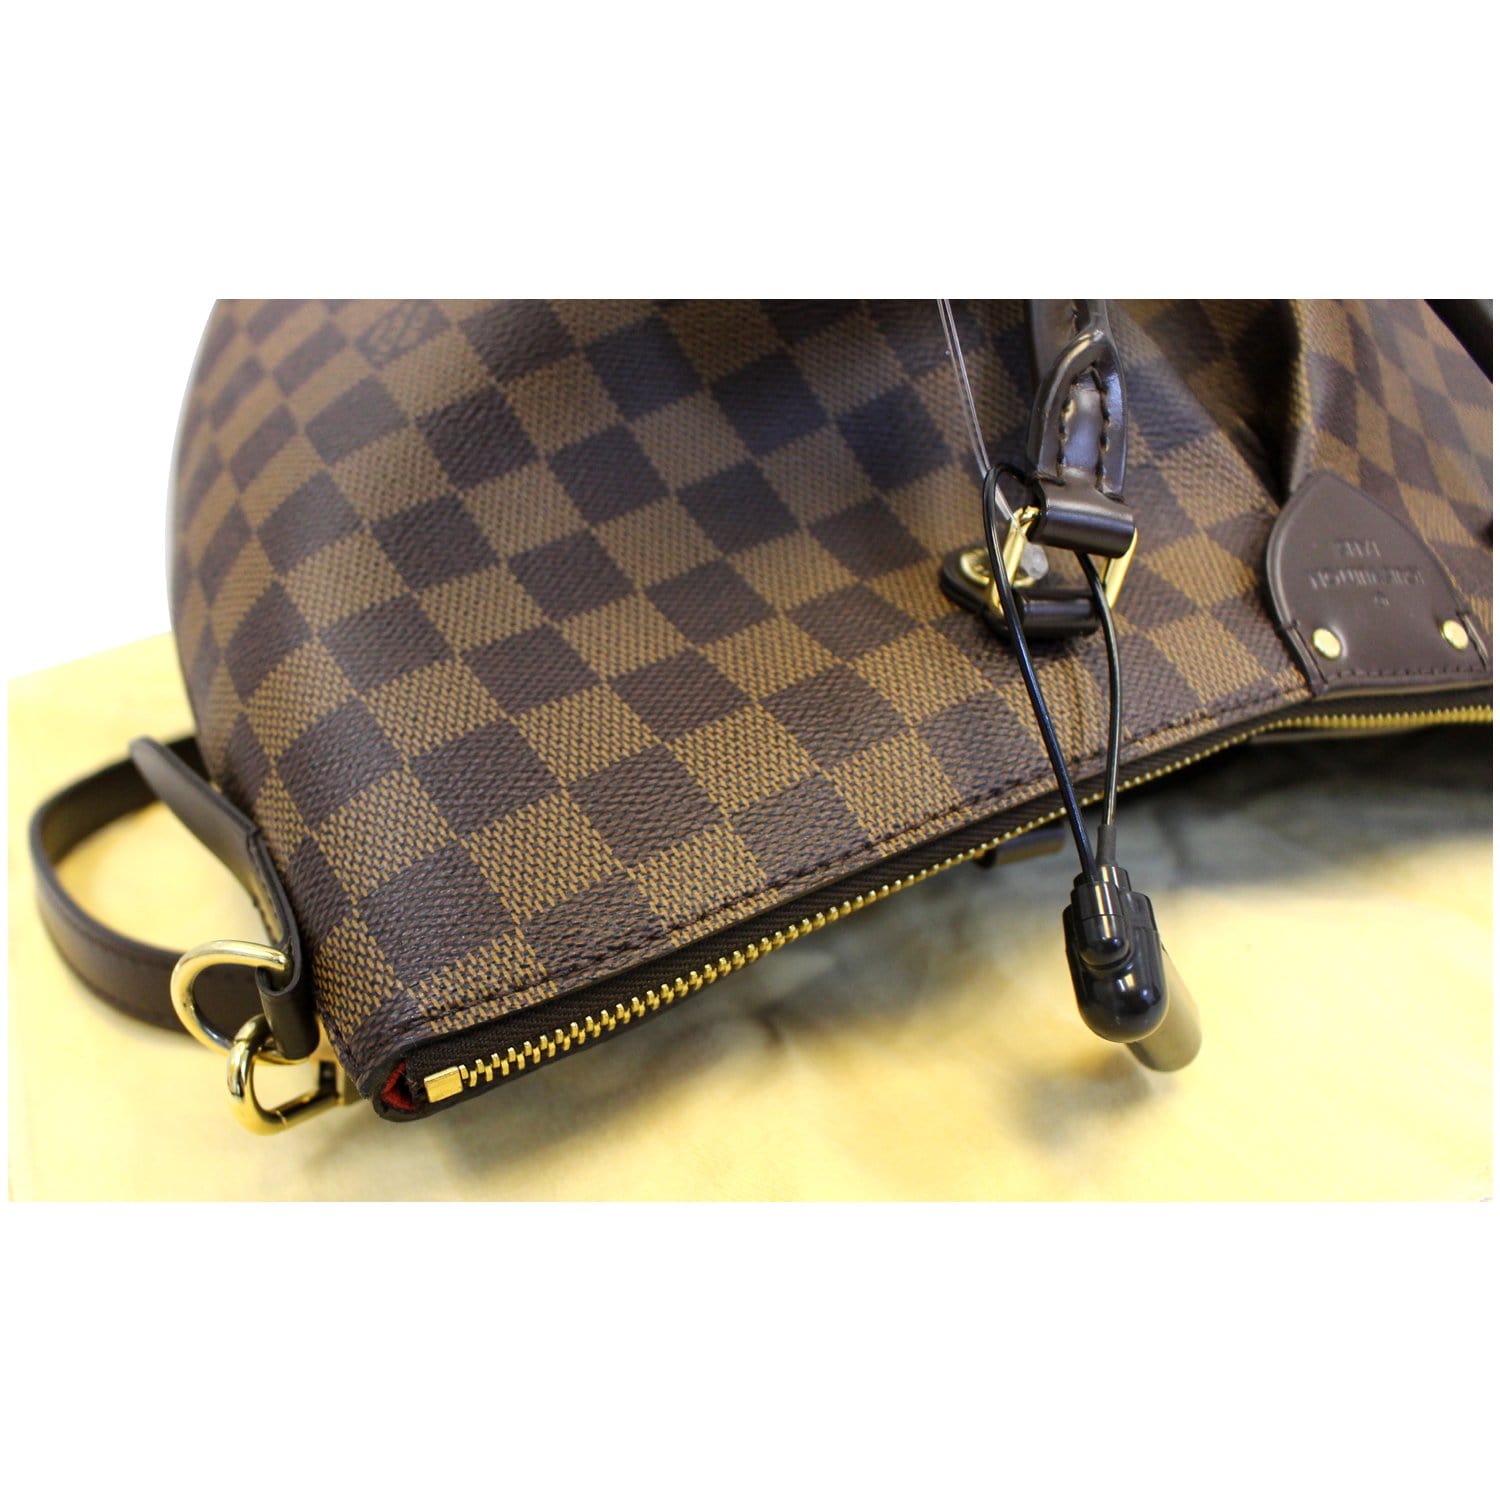 Louis Vuitton Siena bag in MM size. I've been waiting a long time for a  nice LV bag in the D…